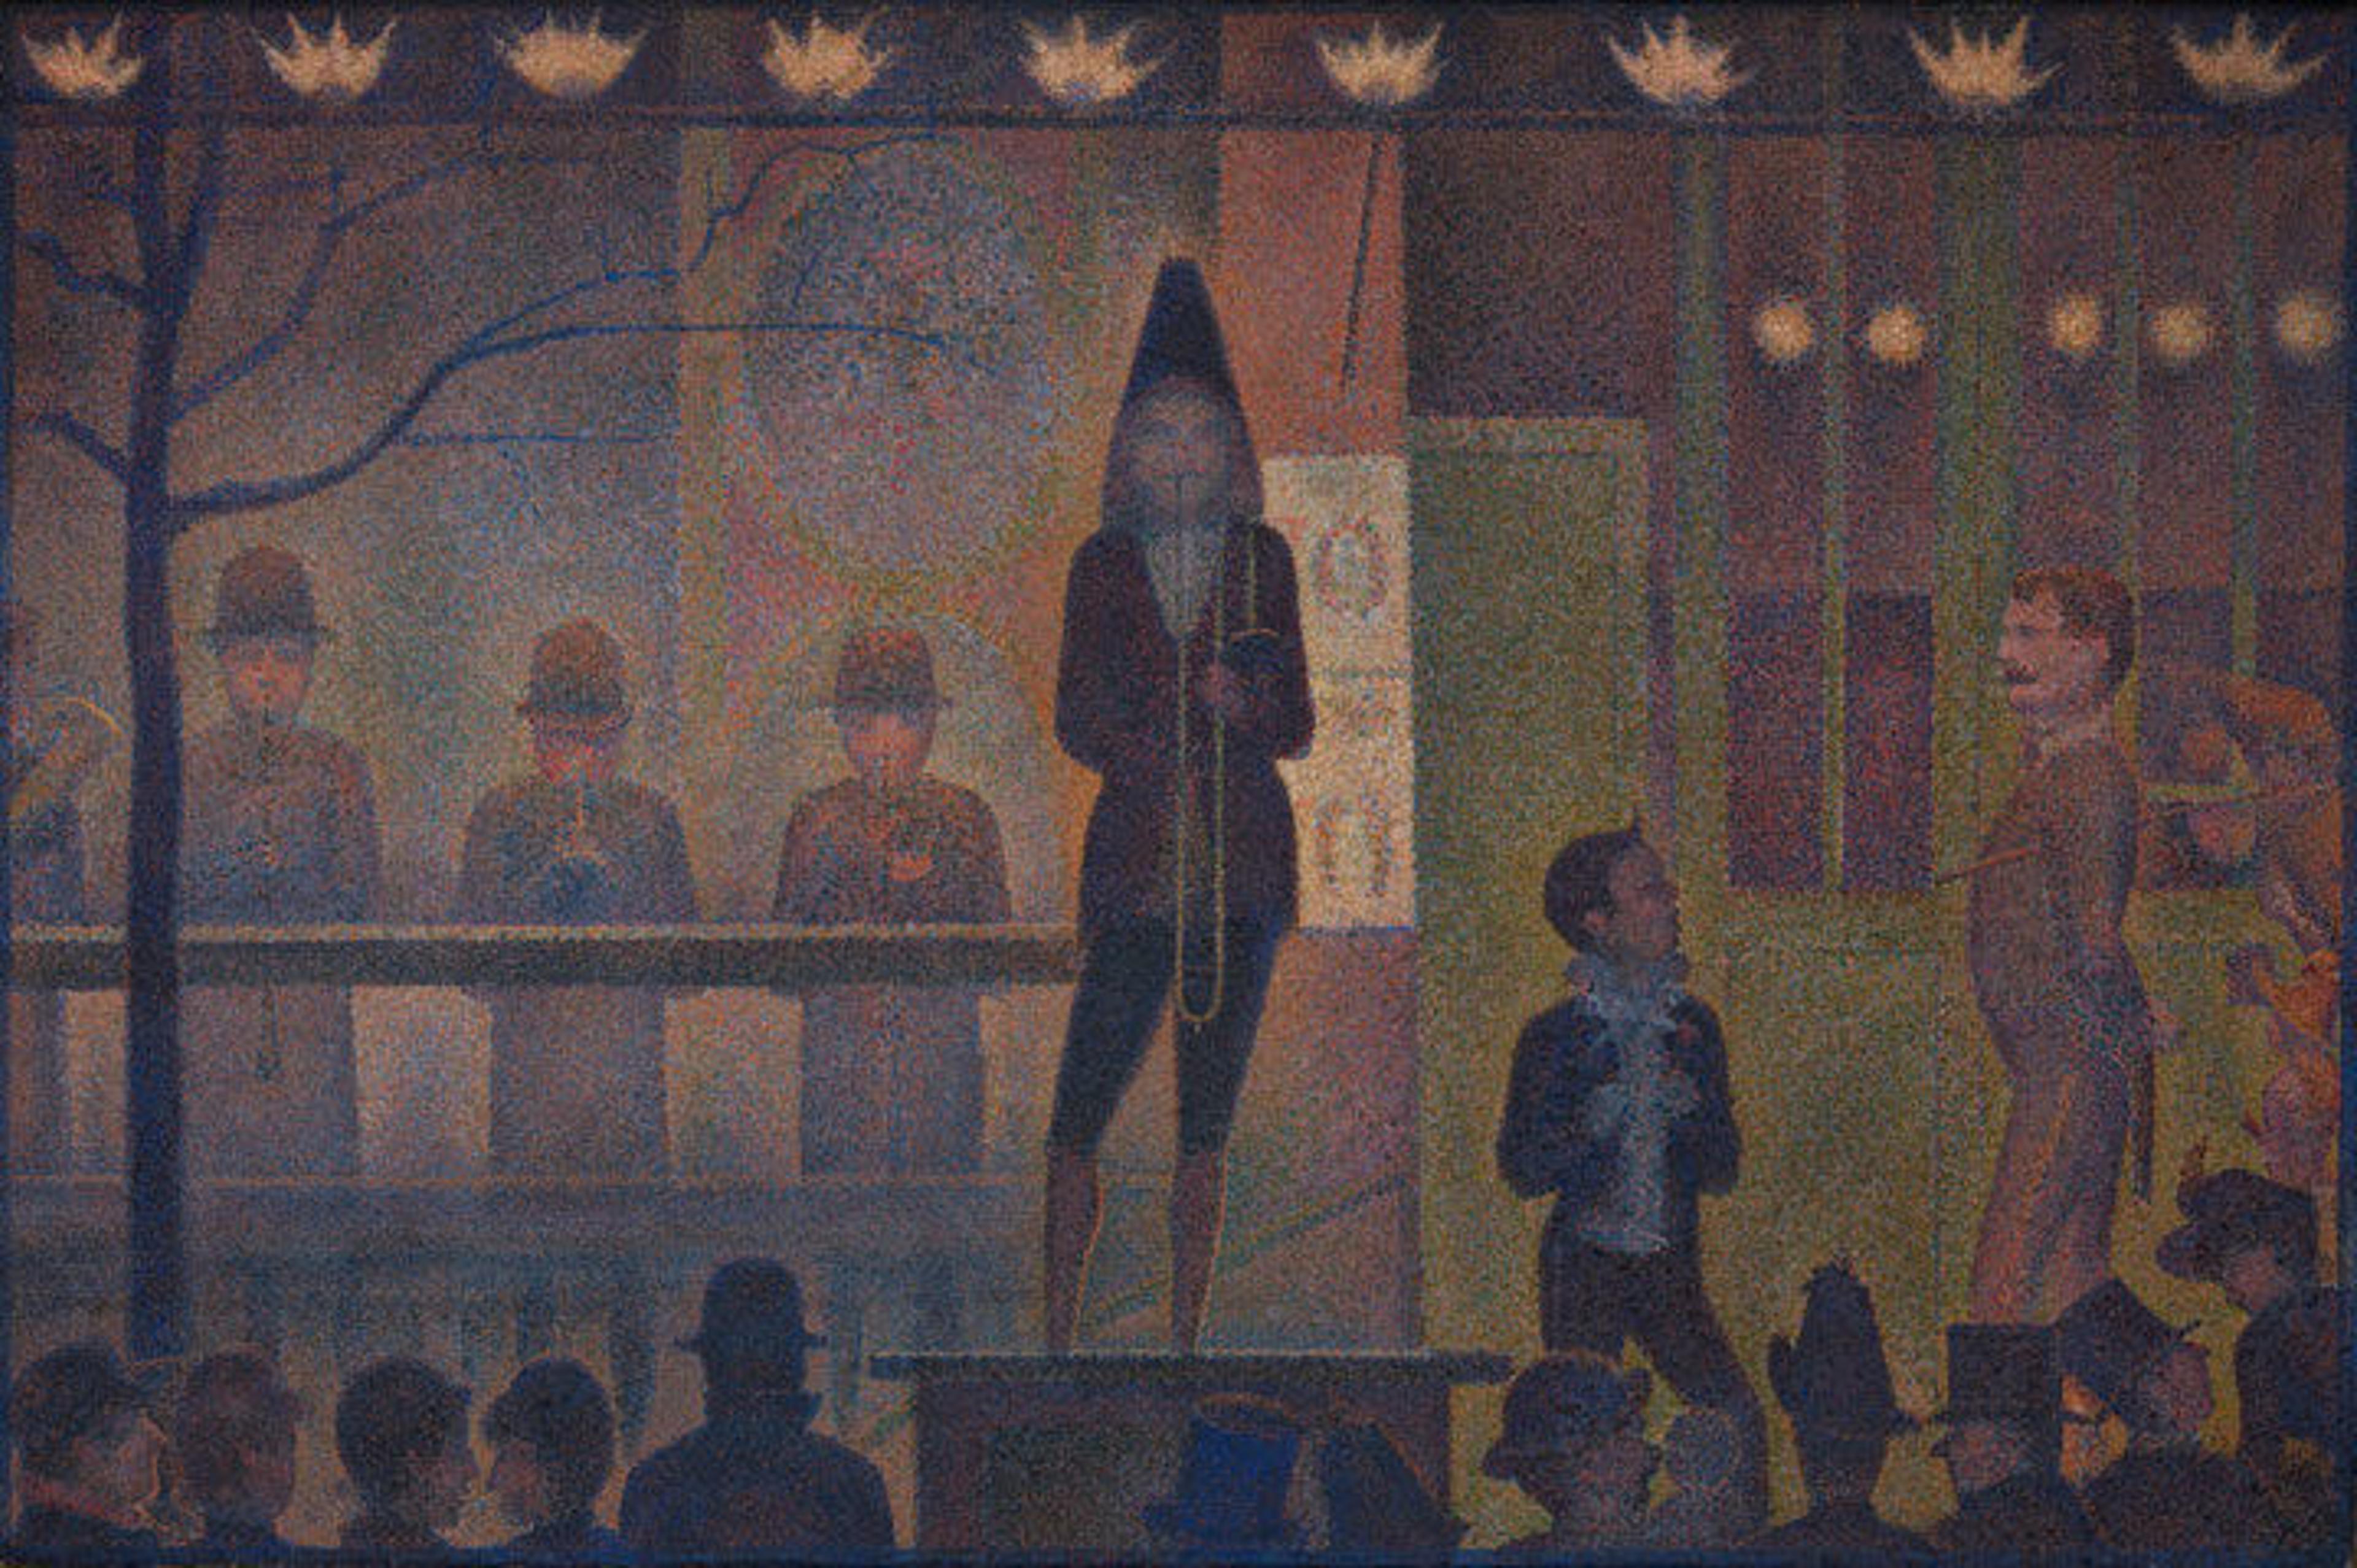 George Seurat painting depicting a French parade, or circus sideshow